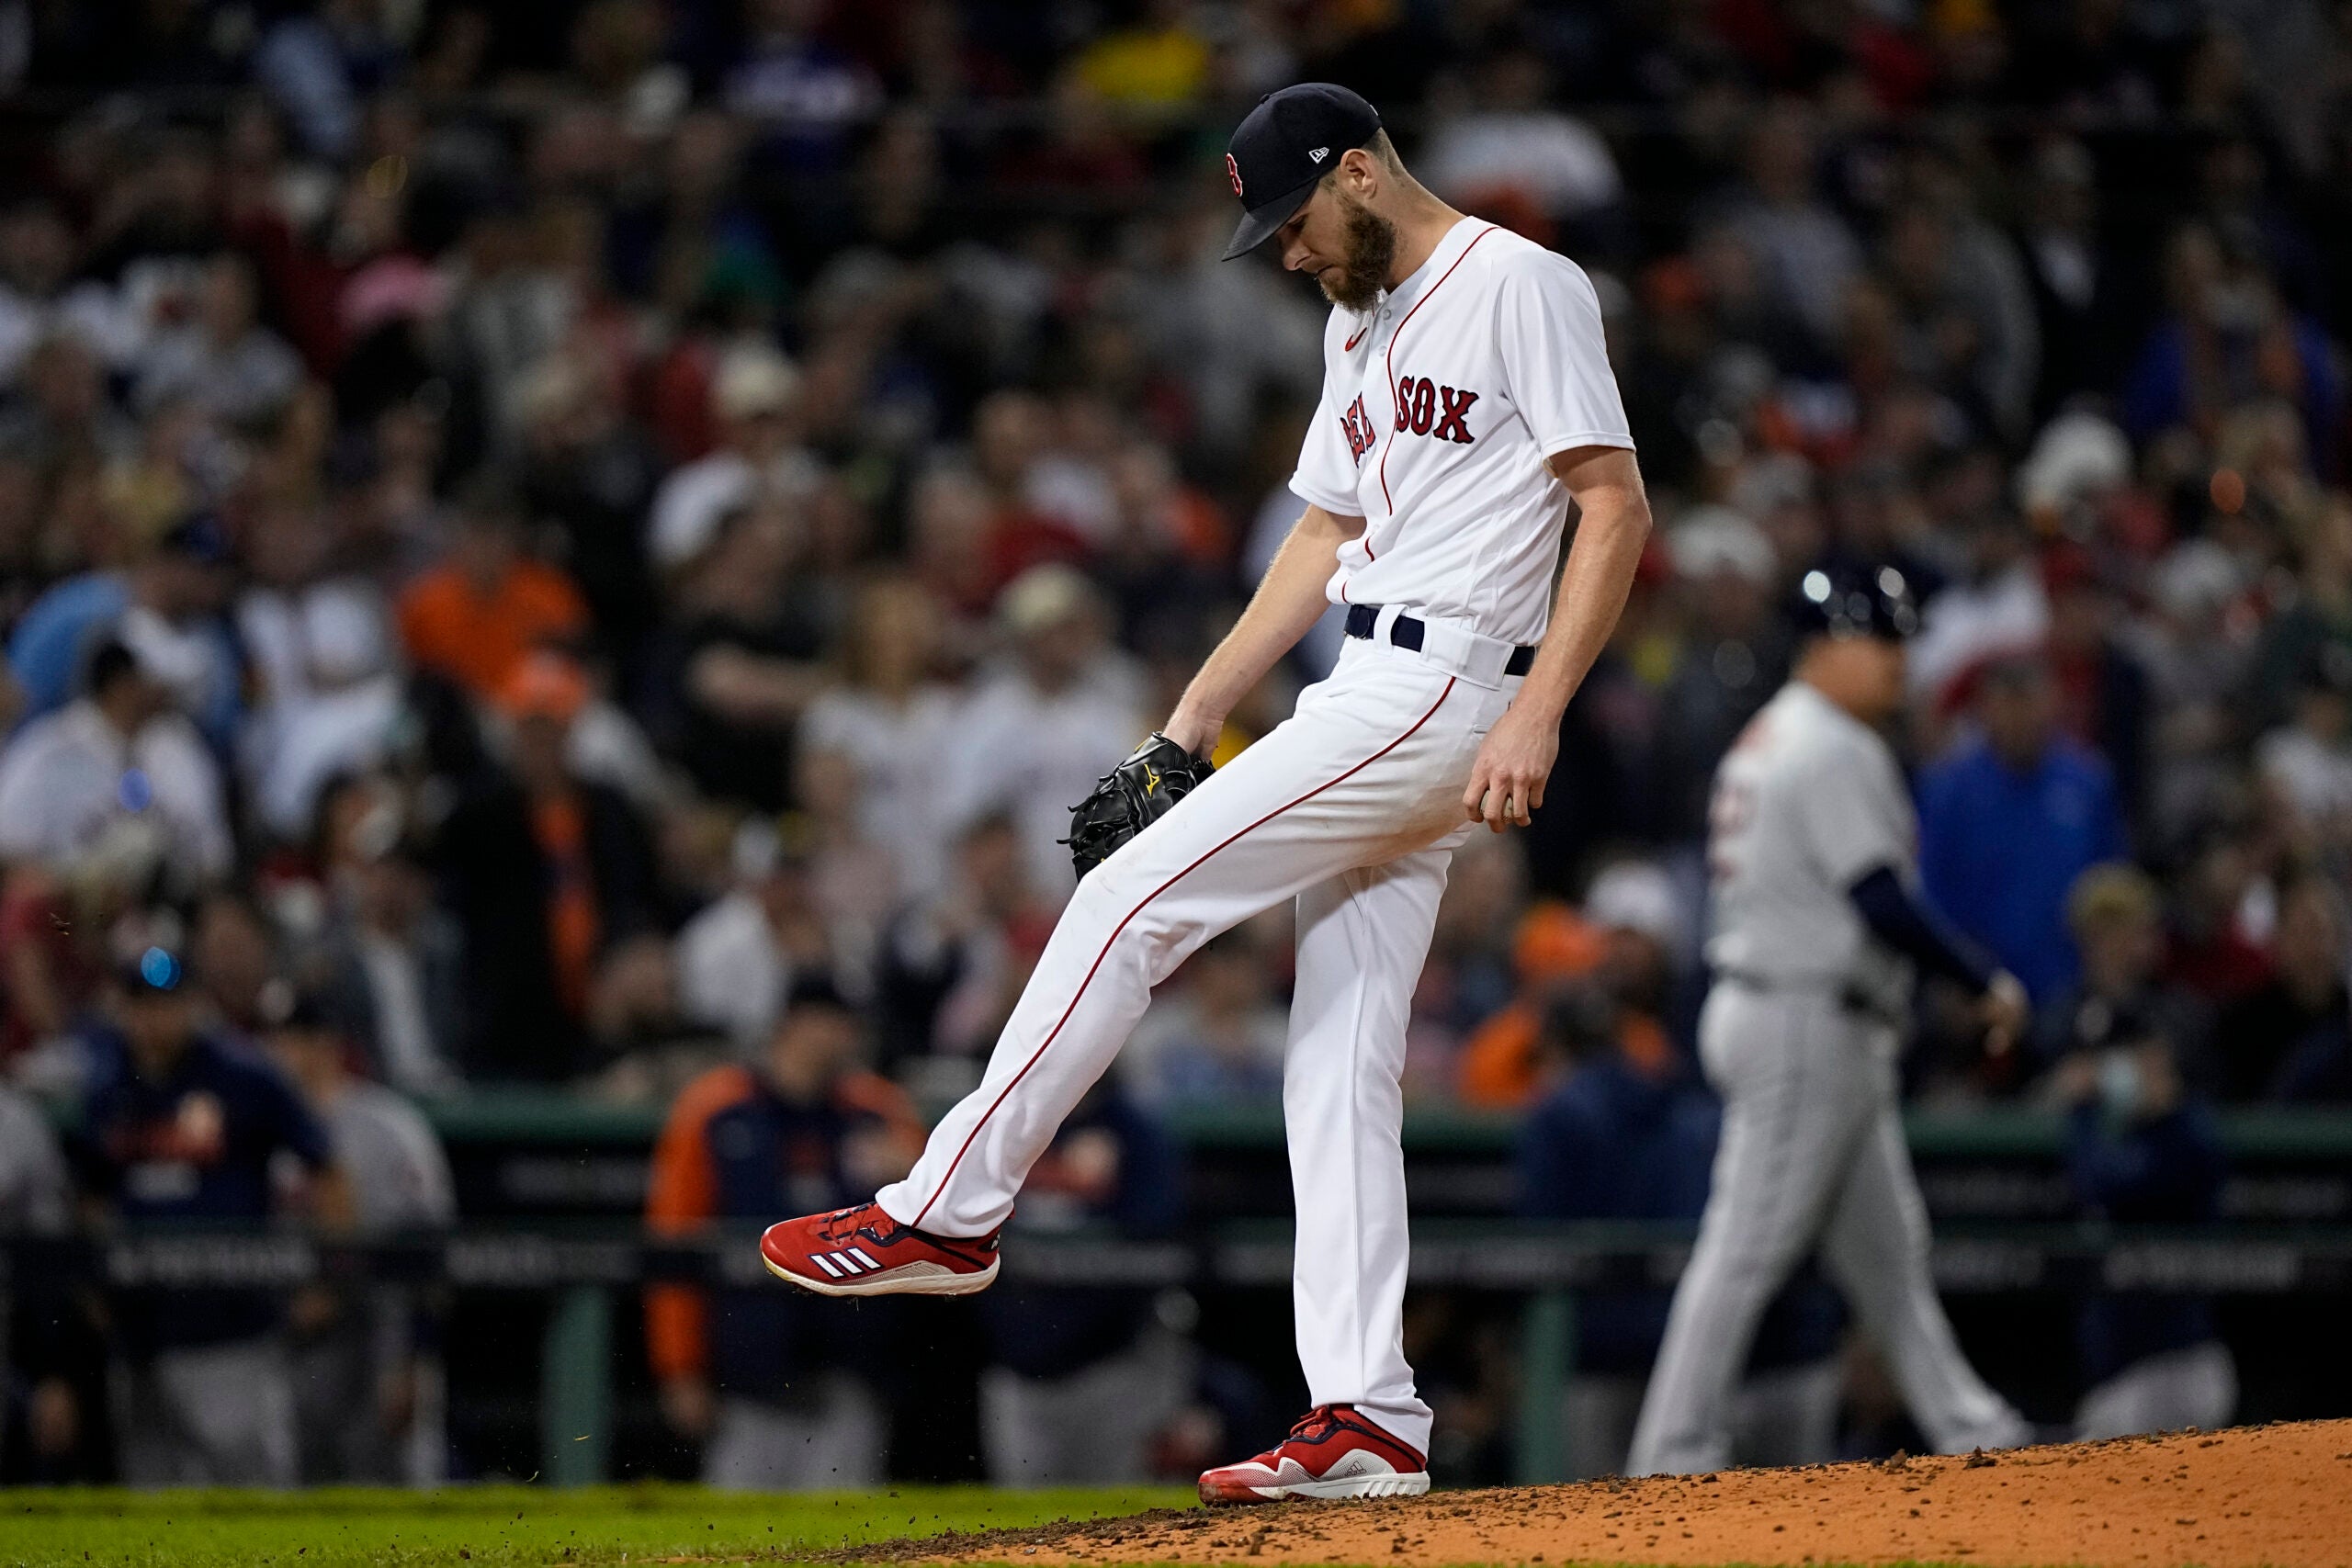 Chris Sale won't start ALCS Game 5 for Red Sox after battling illness